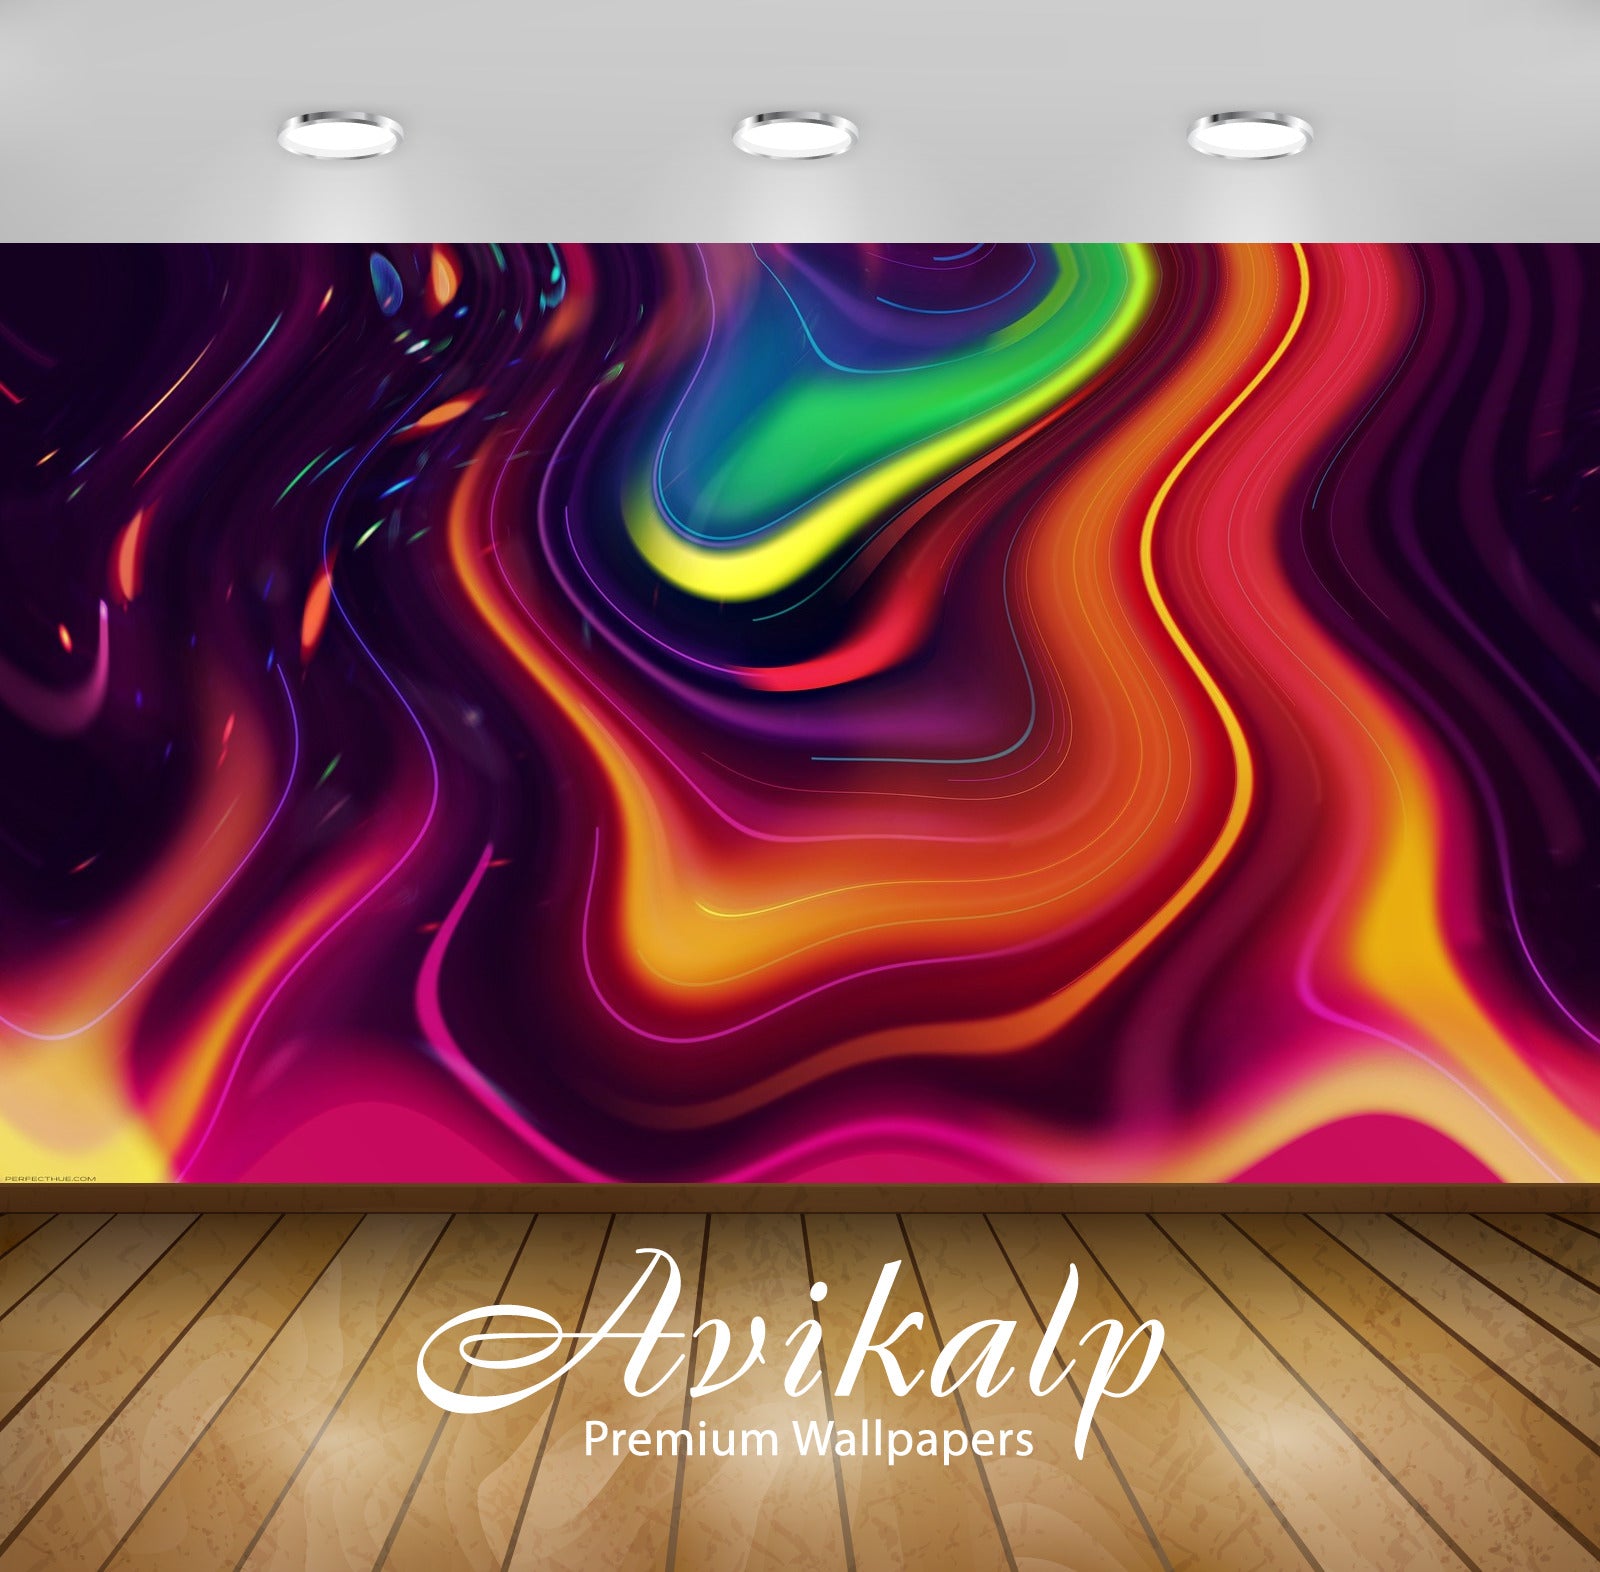 Avikalp Exclusive Awi1396 Color Splash Full HD Wallpapers for Living room, Hall, Kids Room, Kitchen,